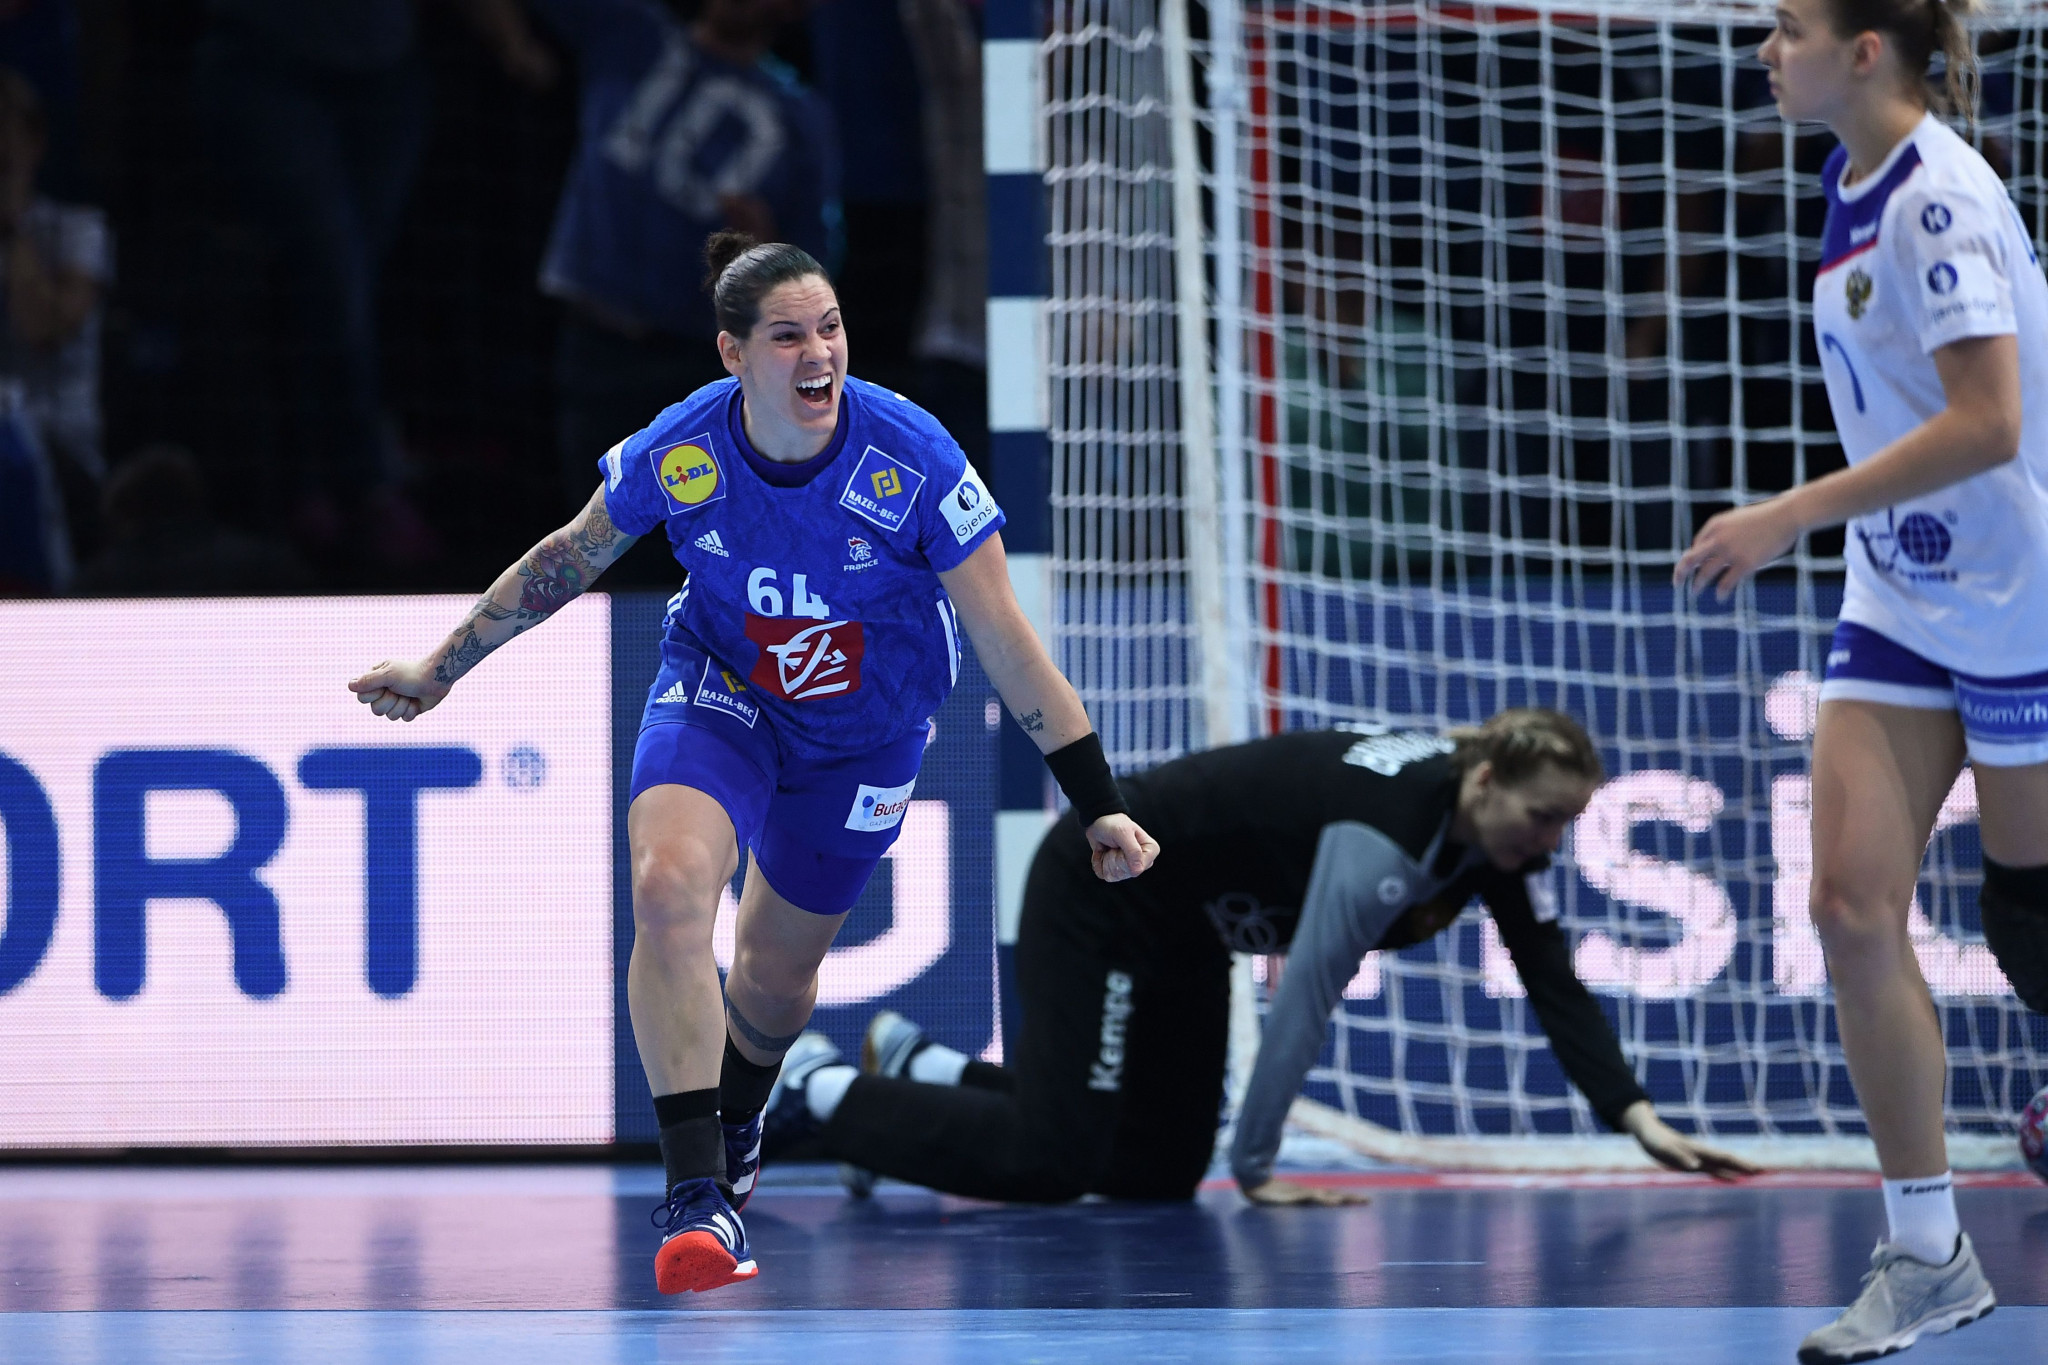 European Women's Handball Championships to be expanded to 24 teams from